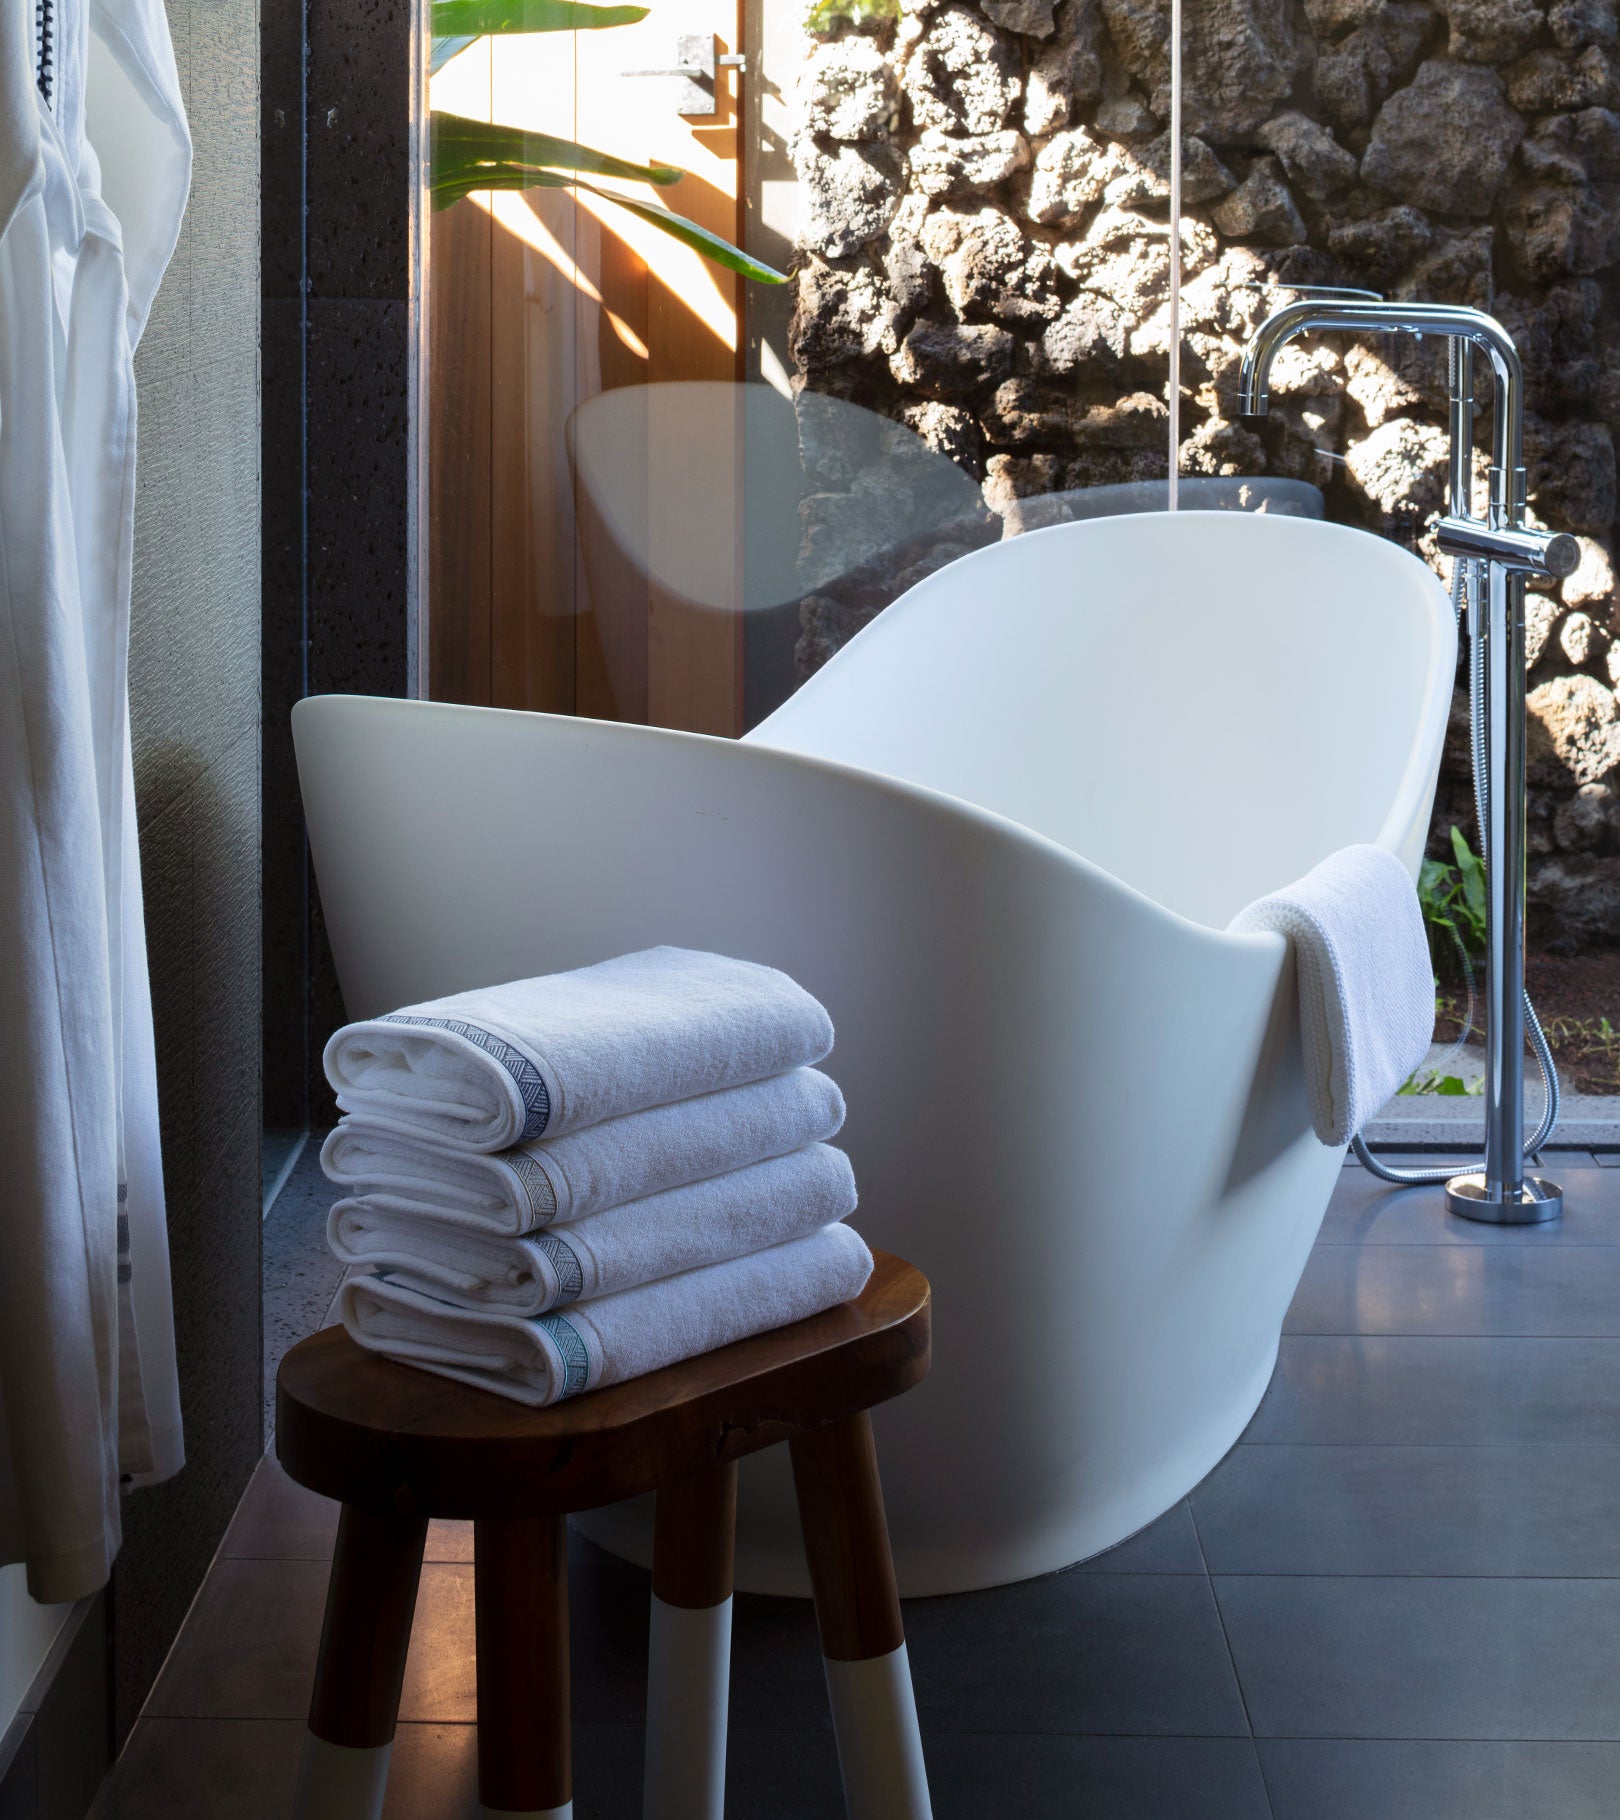 Averylily Weave Bath Towels, made from 600-gram weight pure Aegean cotton. 